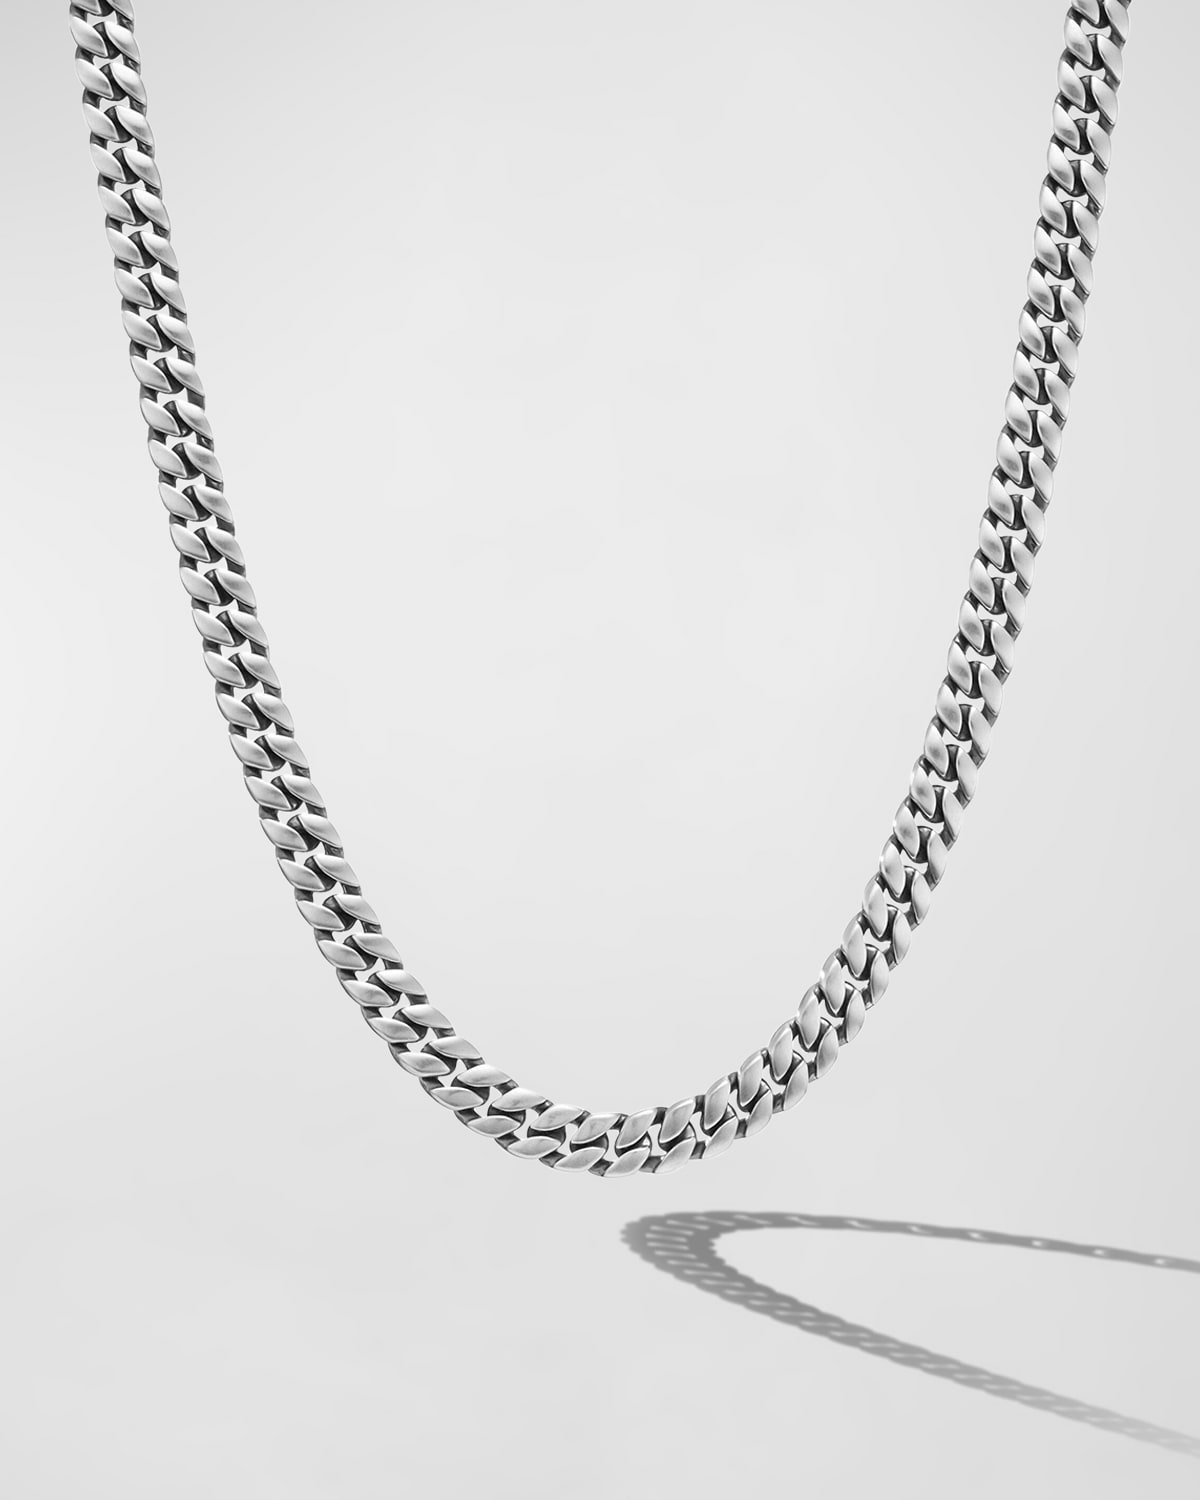 Men's Curb Chain Necklace in Silver, 6mm, 24"L